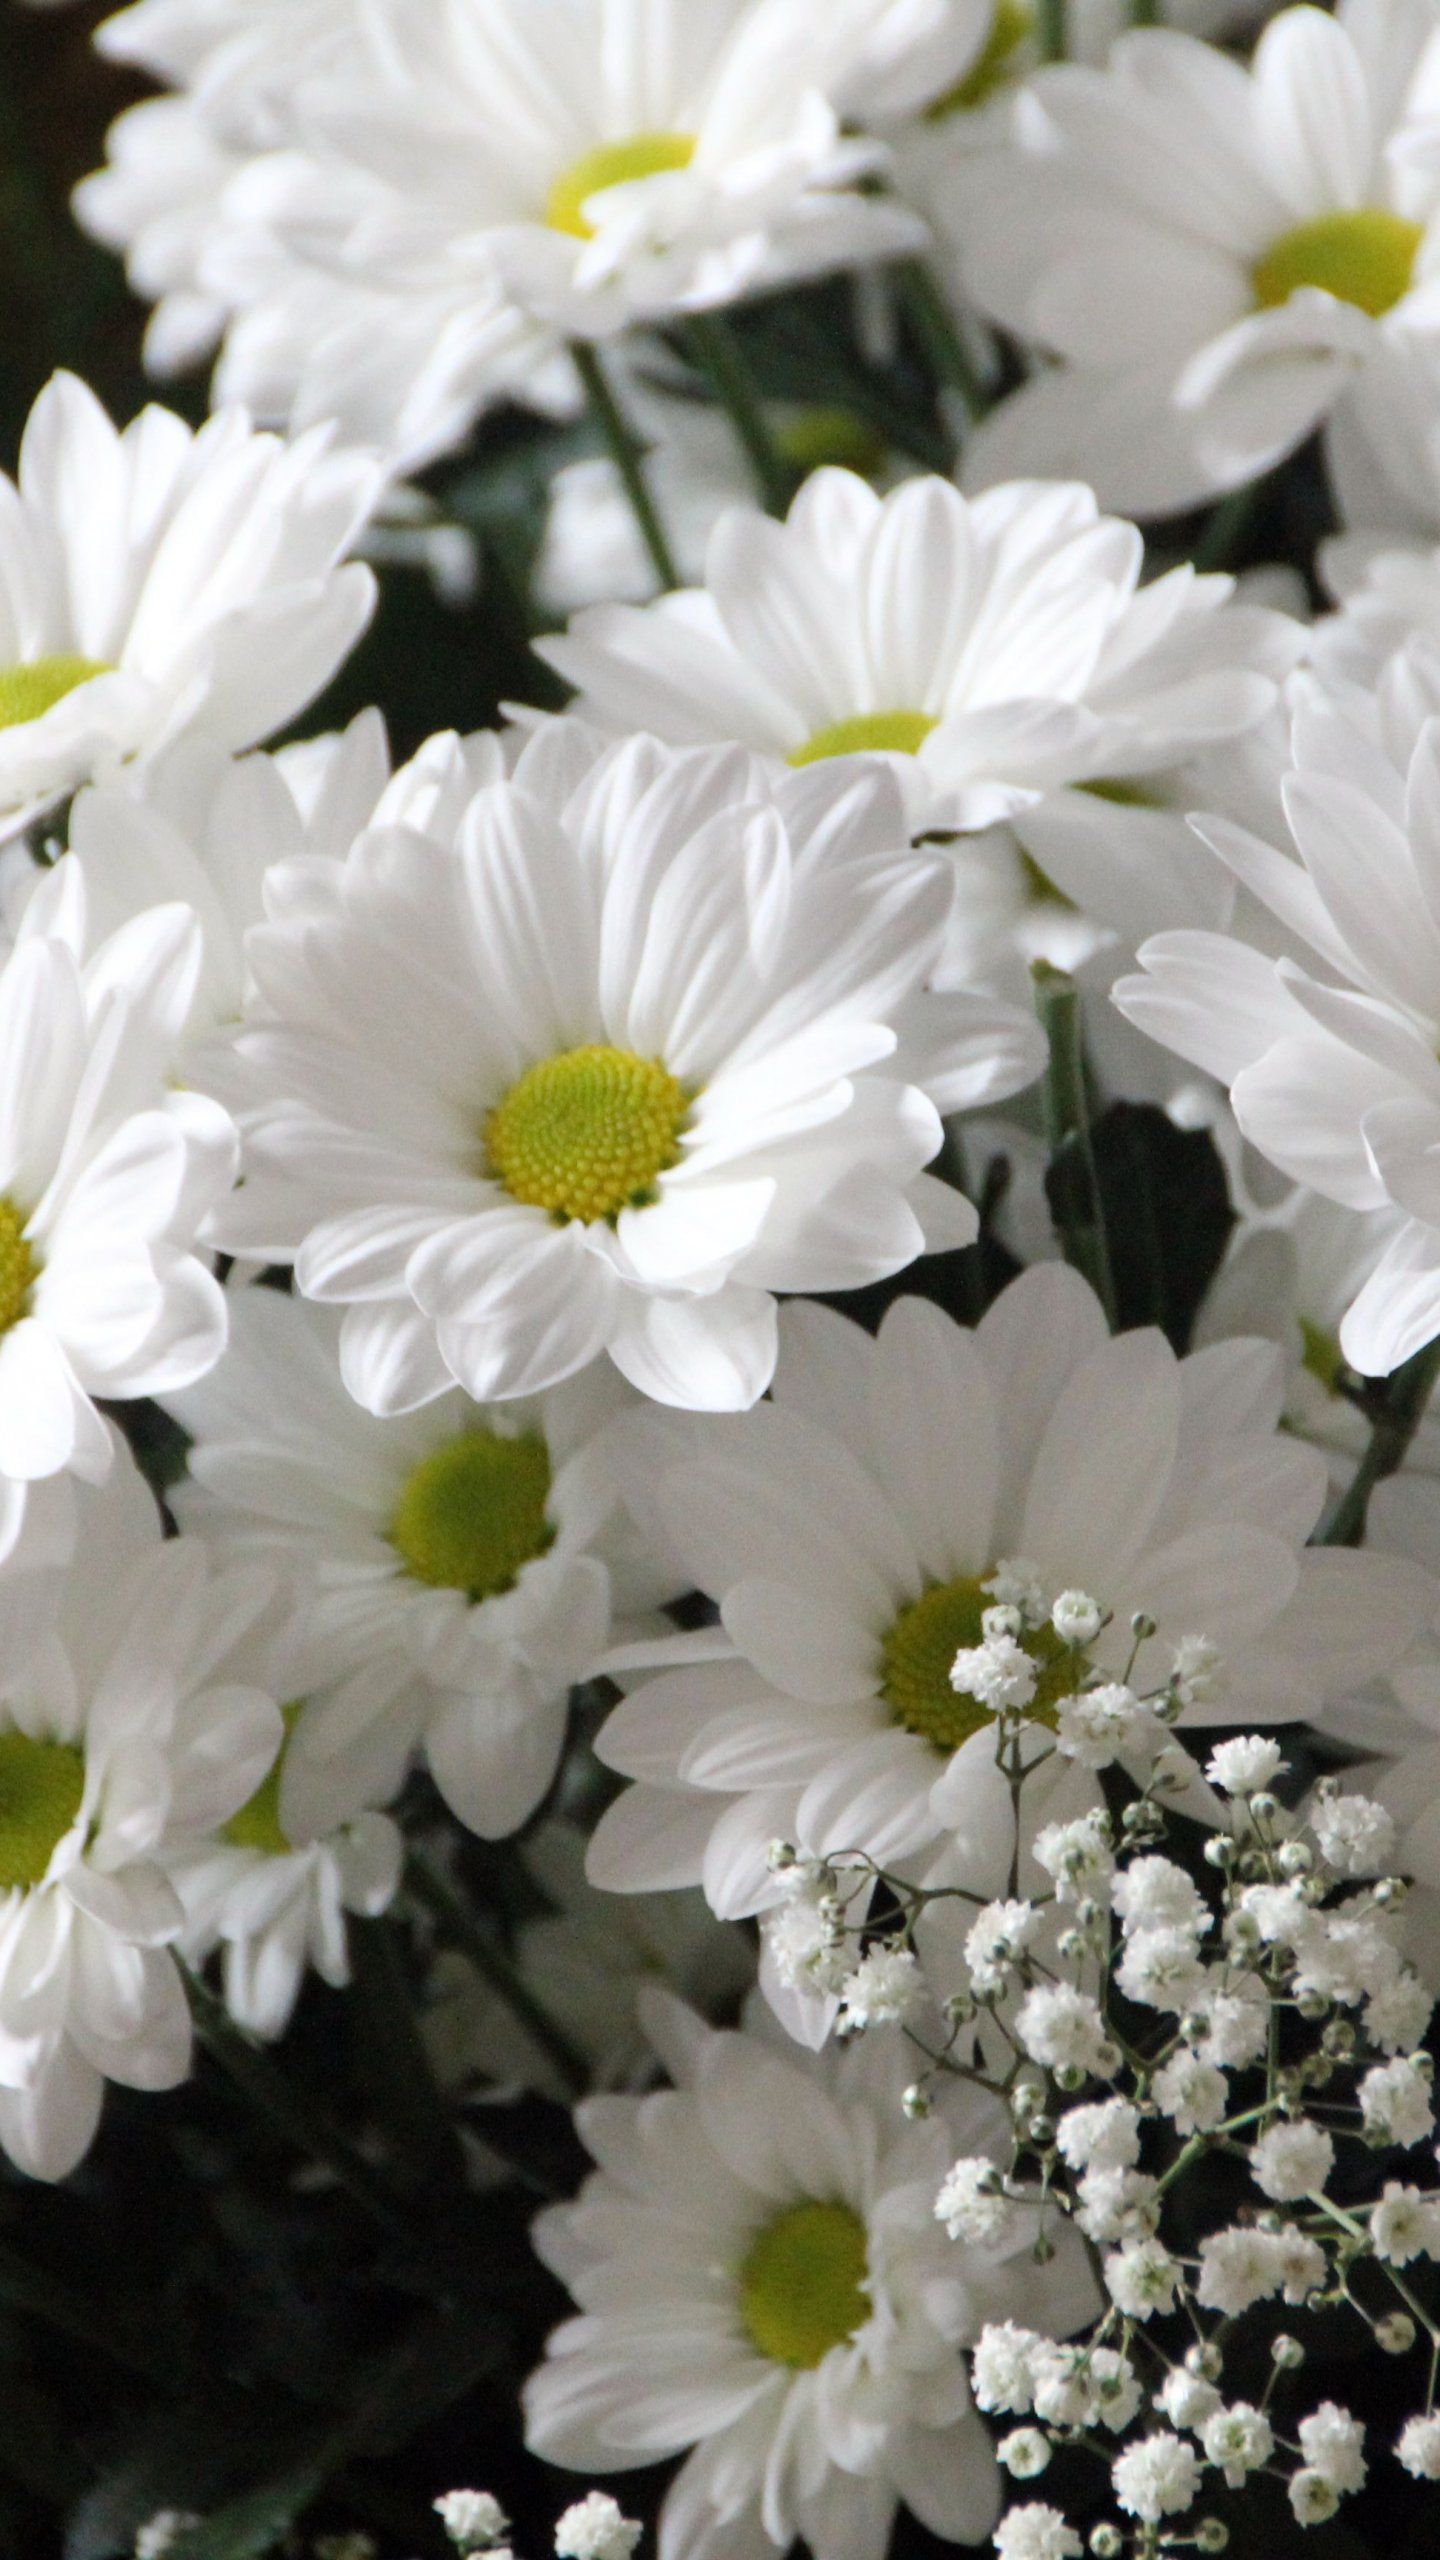 A bouquet of white daisies with a black background - Daisy